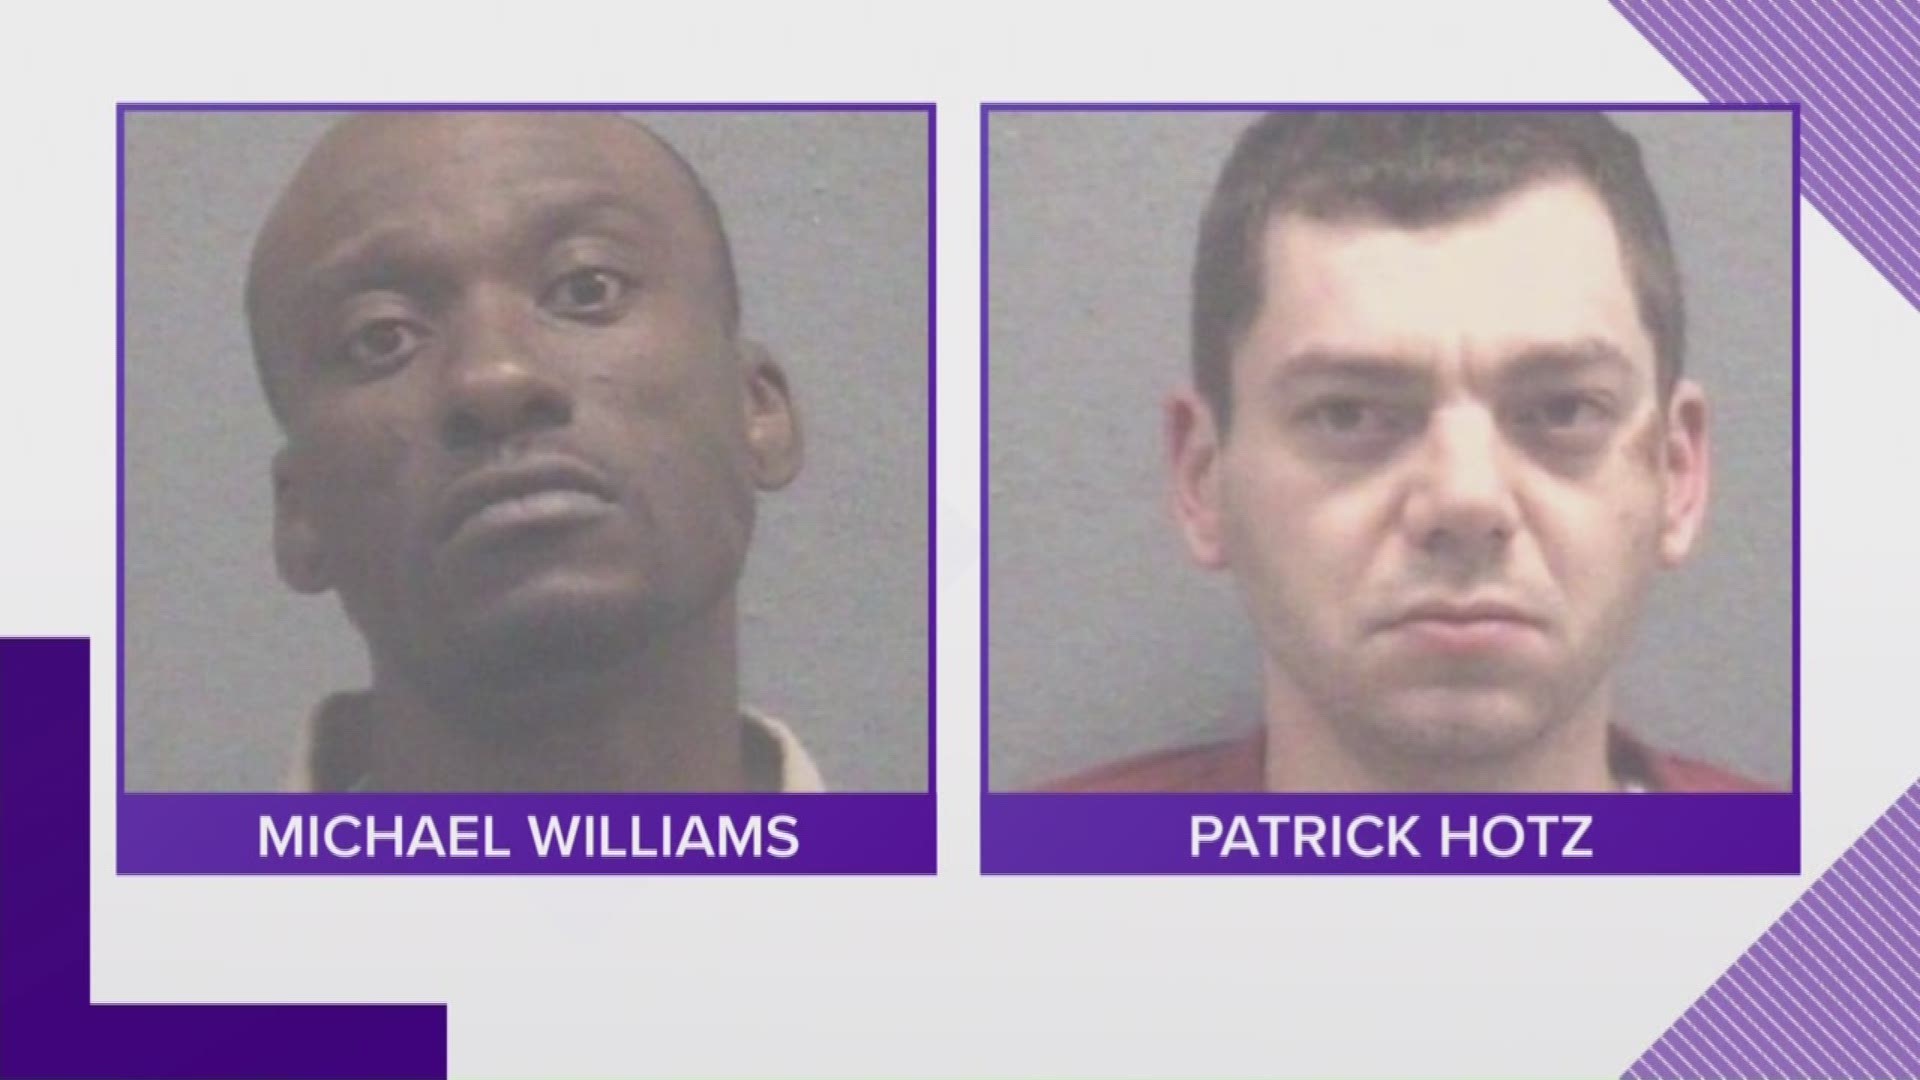 Michael Williams and Patrick Hotz were each charged in connection to the murder.